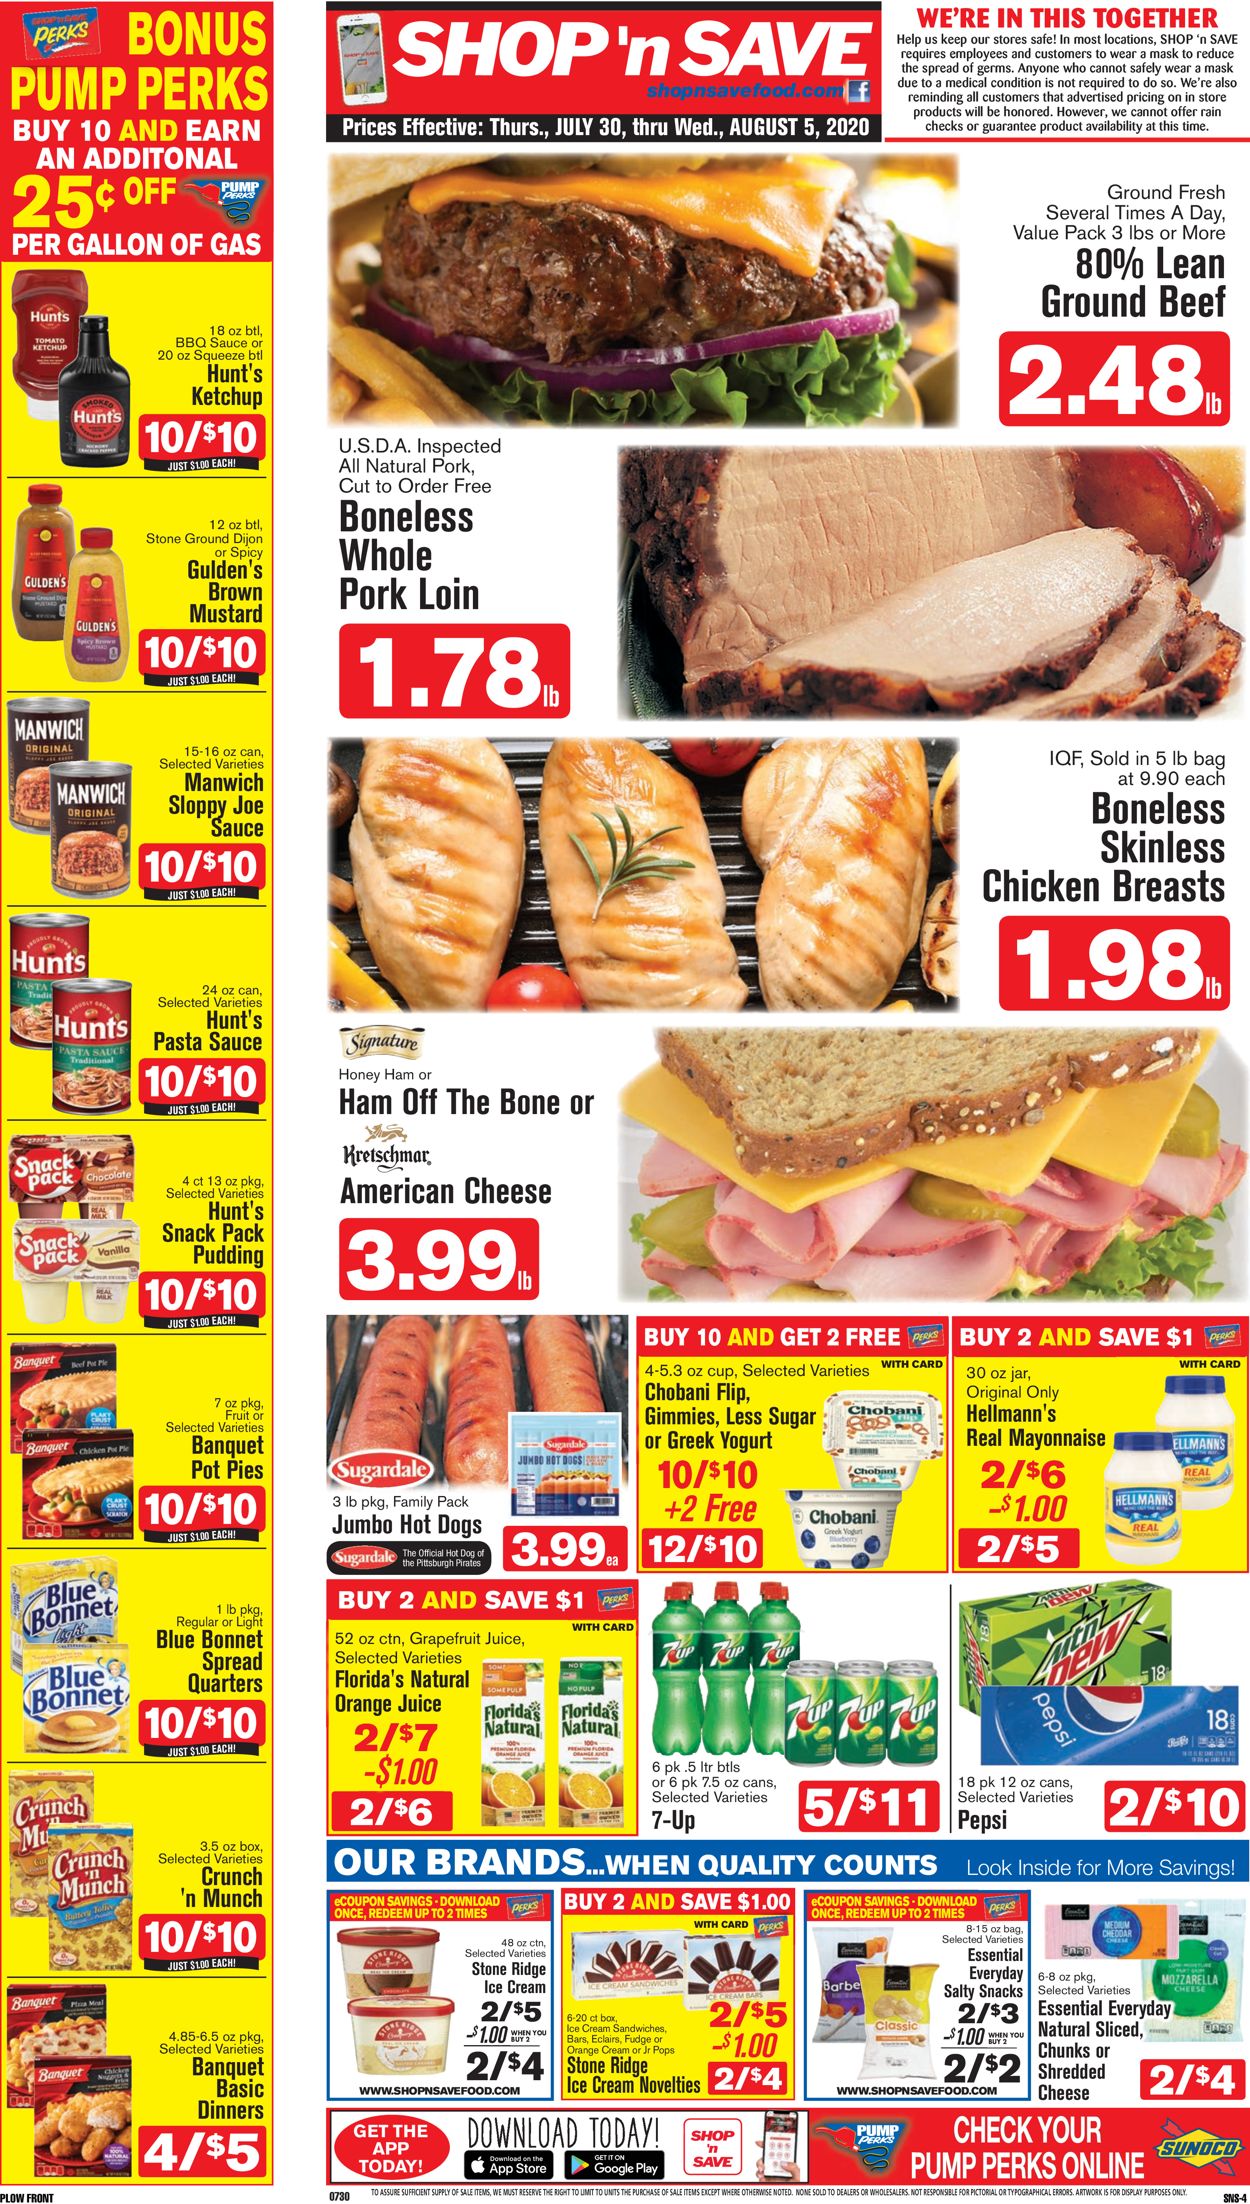 Shop ‘n Save (Pittsburgh) Ad from 07/30/2020